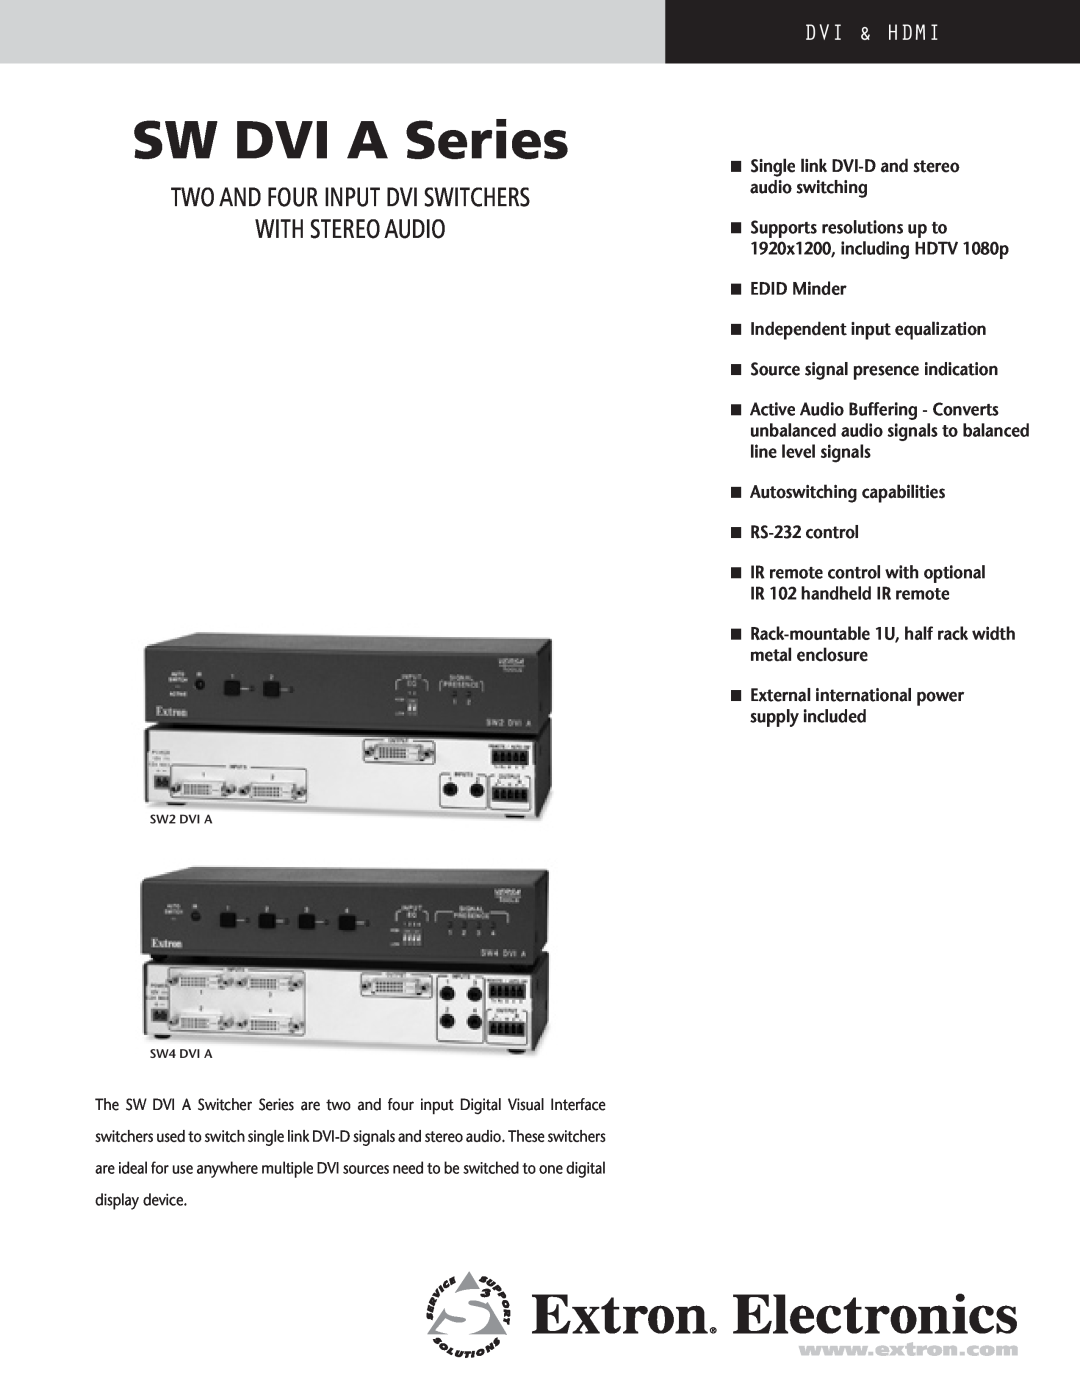 Extron electronic SW4 DVI A manual Two and four input dvi switchers with stereo audio, SW DVI A Series, Dvi & Hdmi 